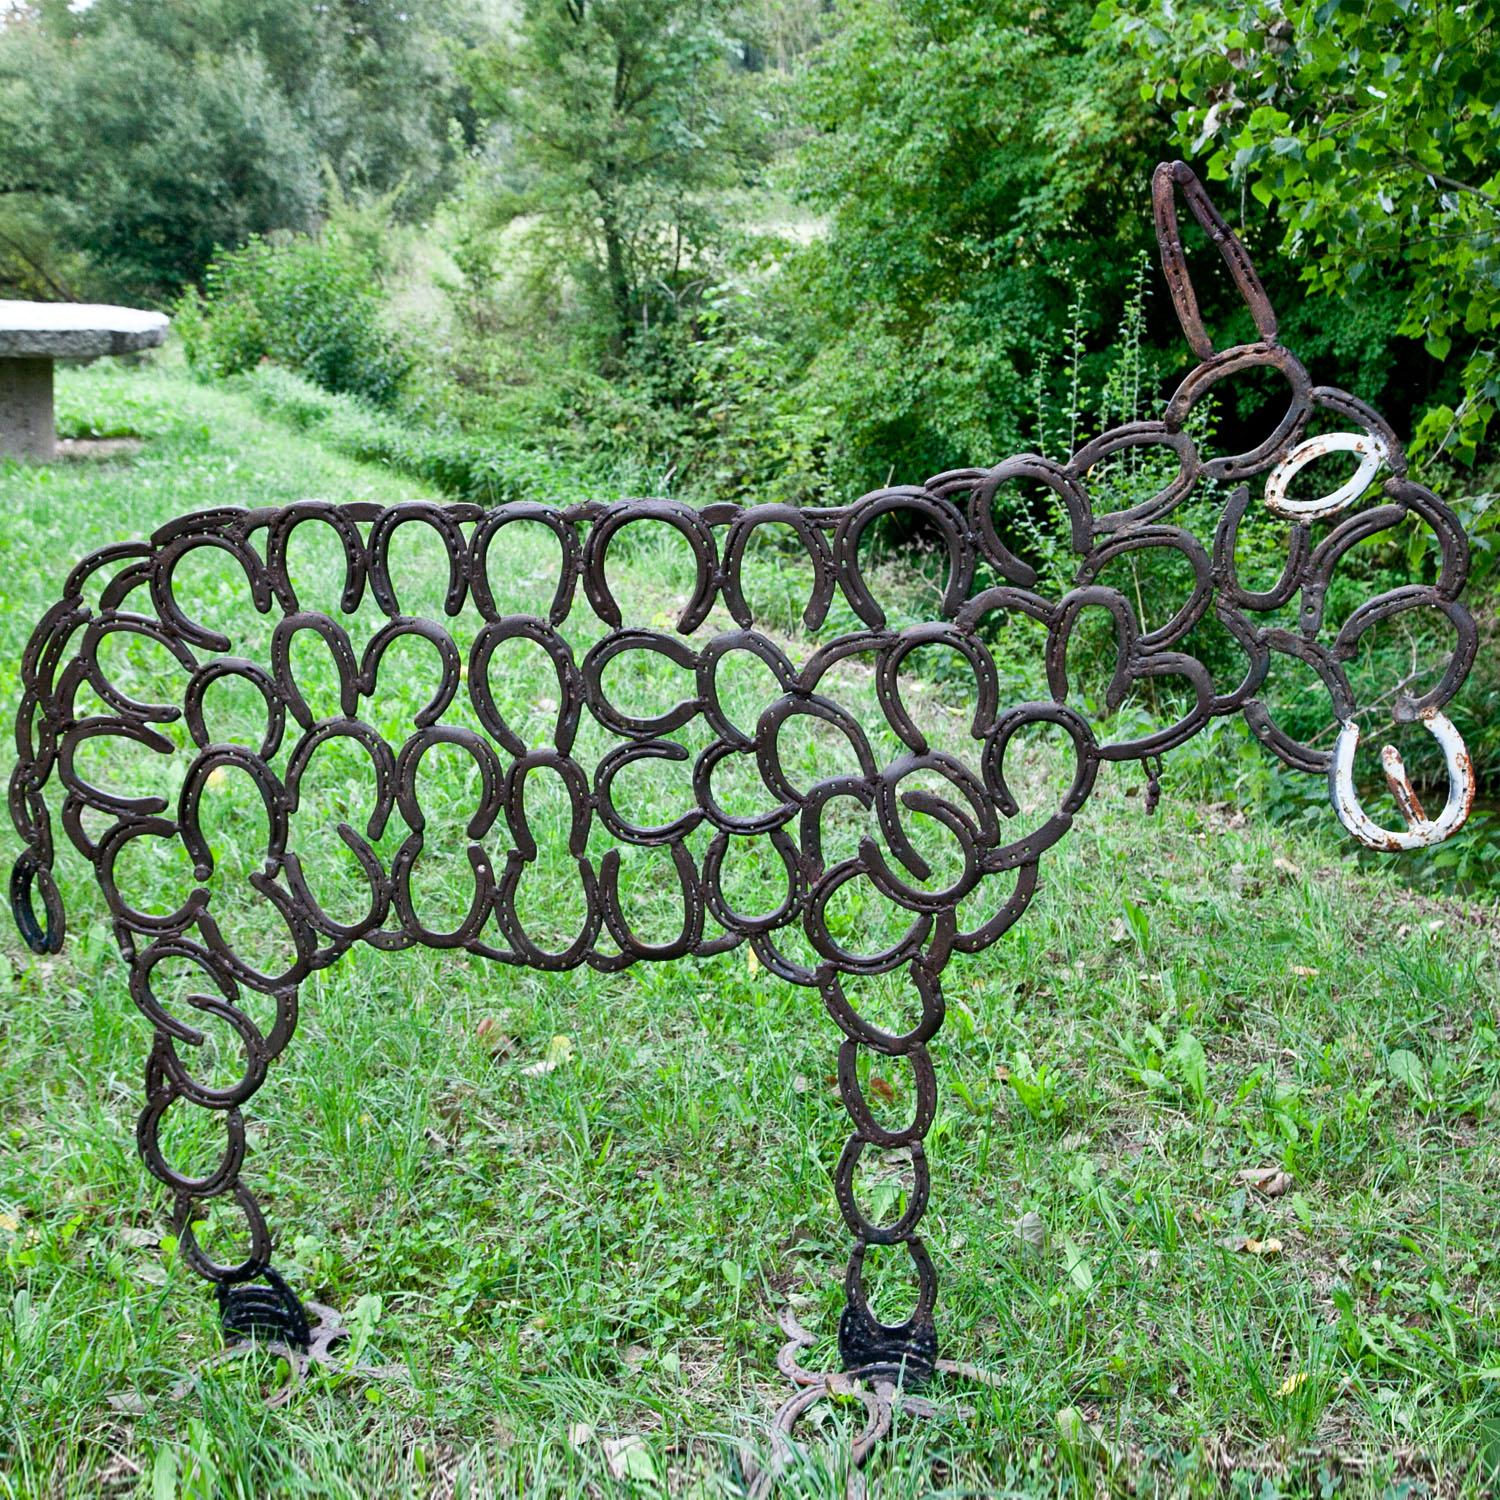 Sculpture of a donkey, made of single horseshoes, welded together. The eye and maul are painted white.